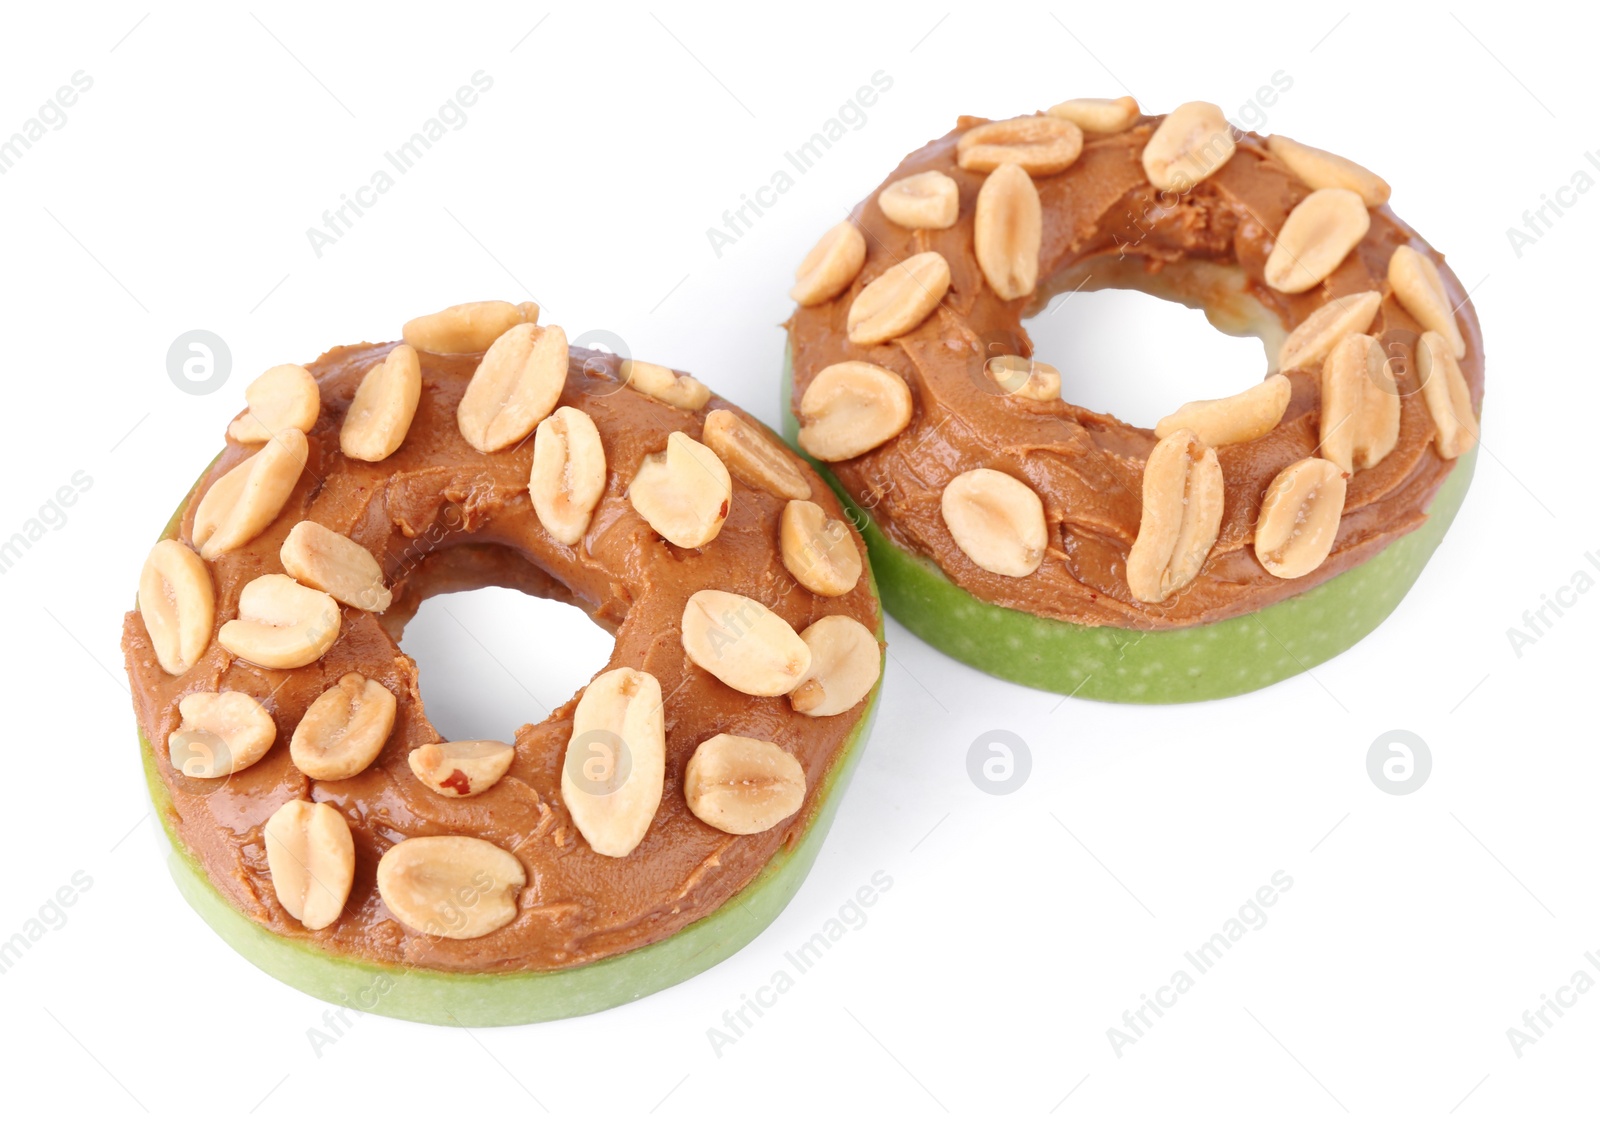 Photo of Slices of fresh apple with peanut butter and nuts isolated on white